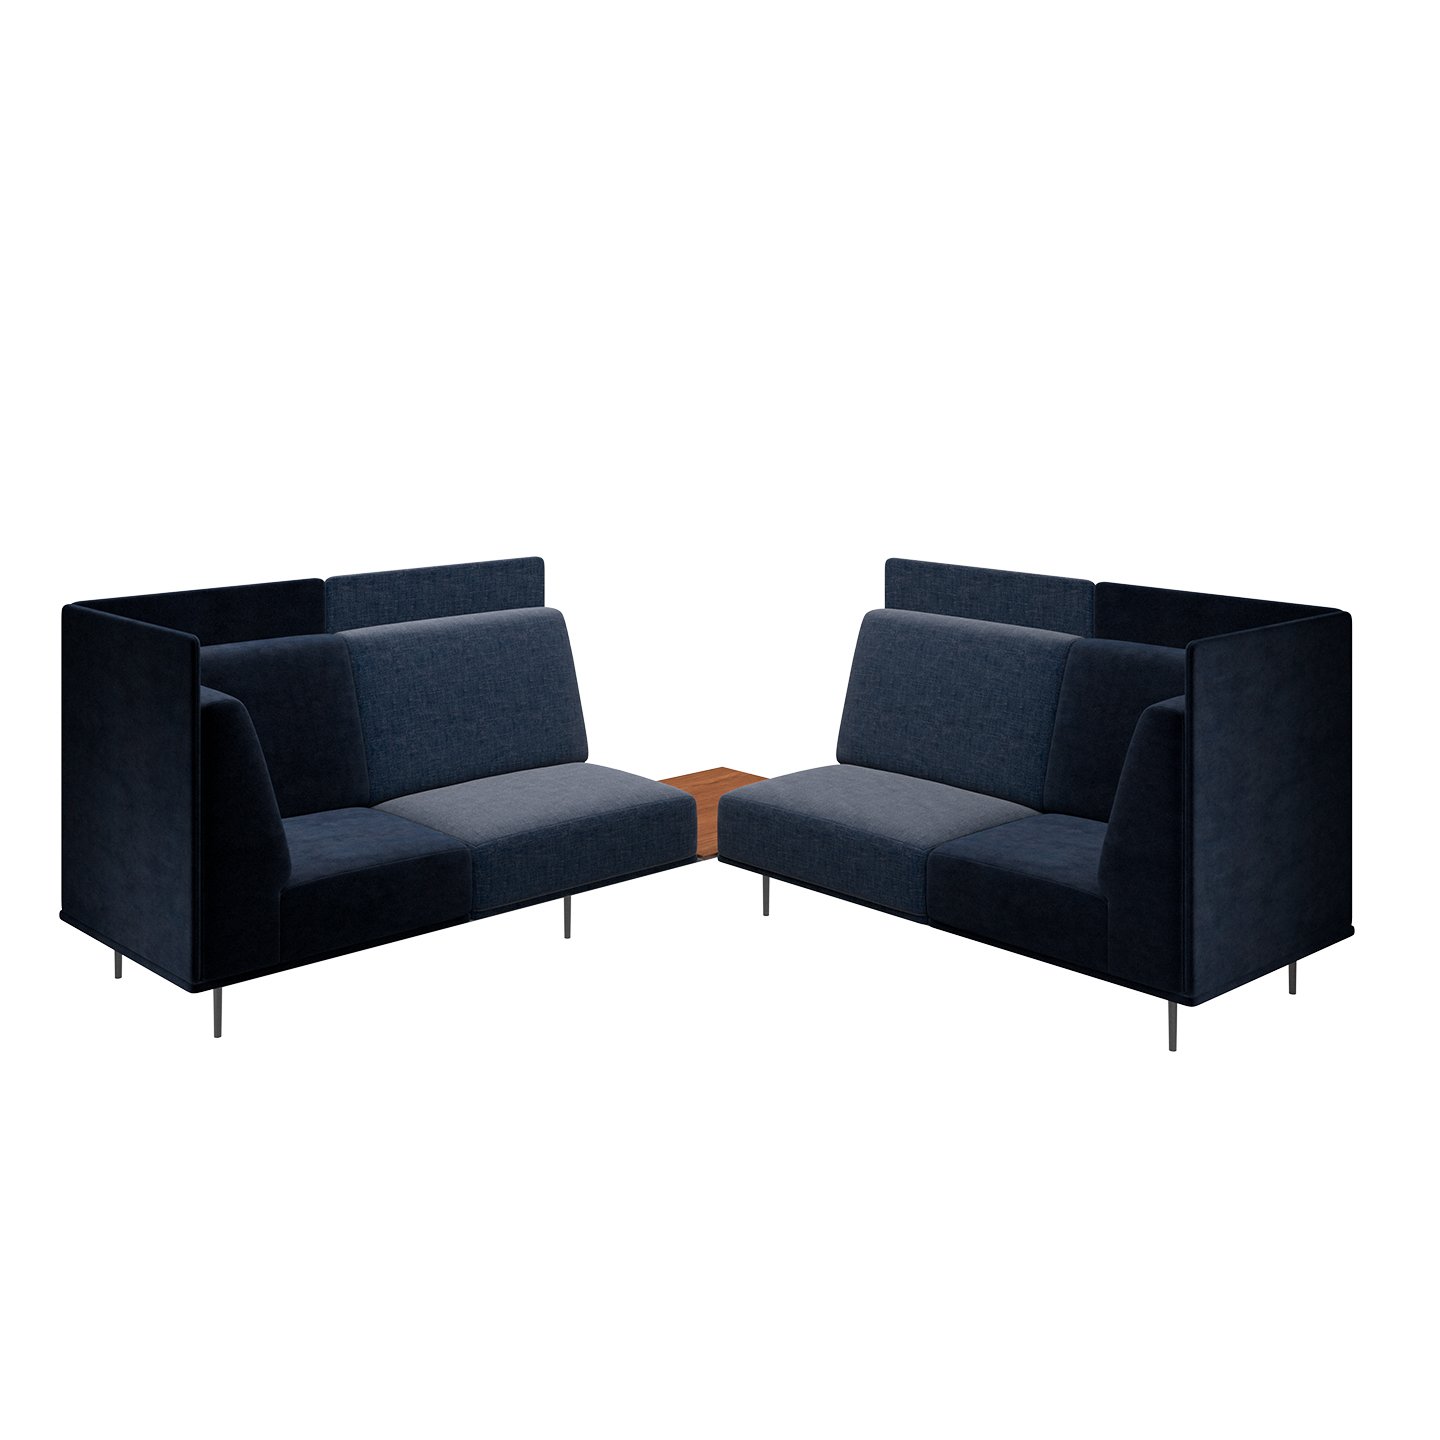 Toulouse sofas from BoConcept